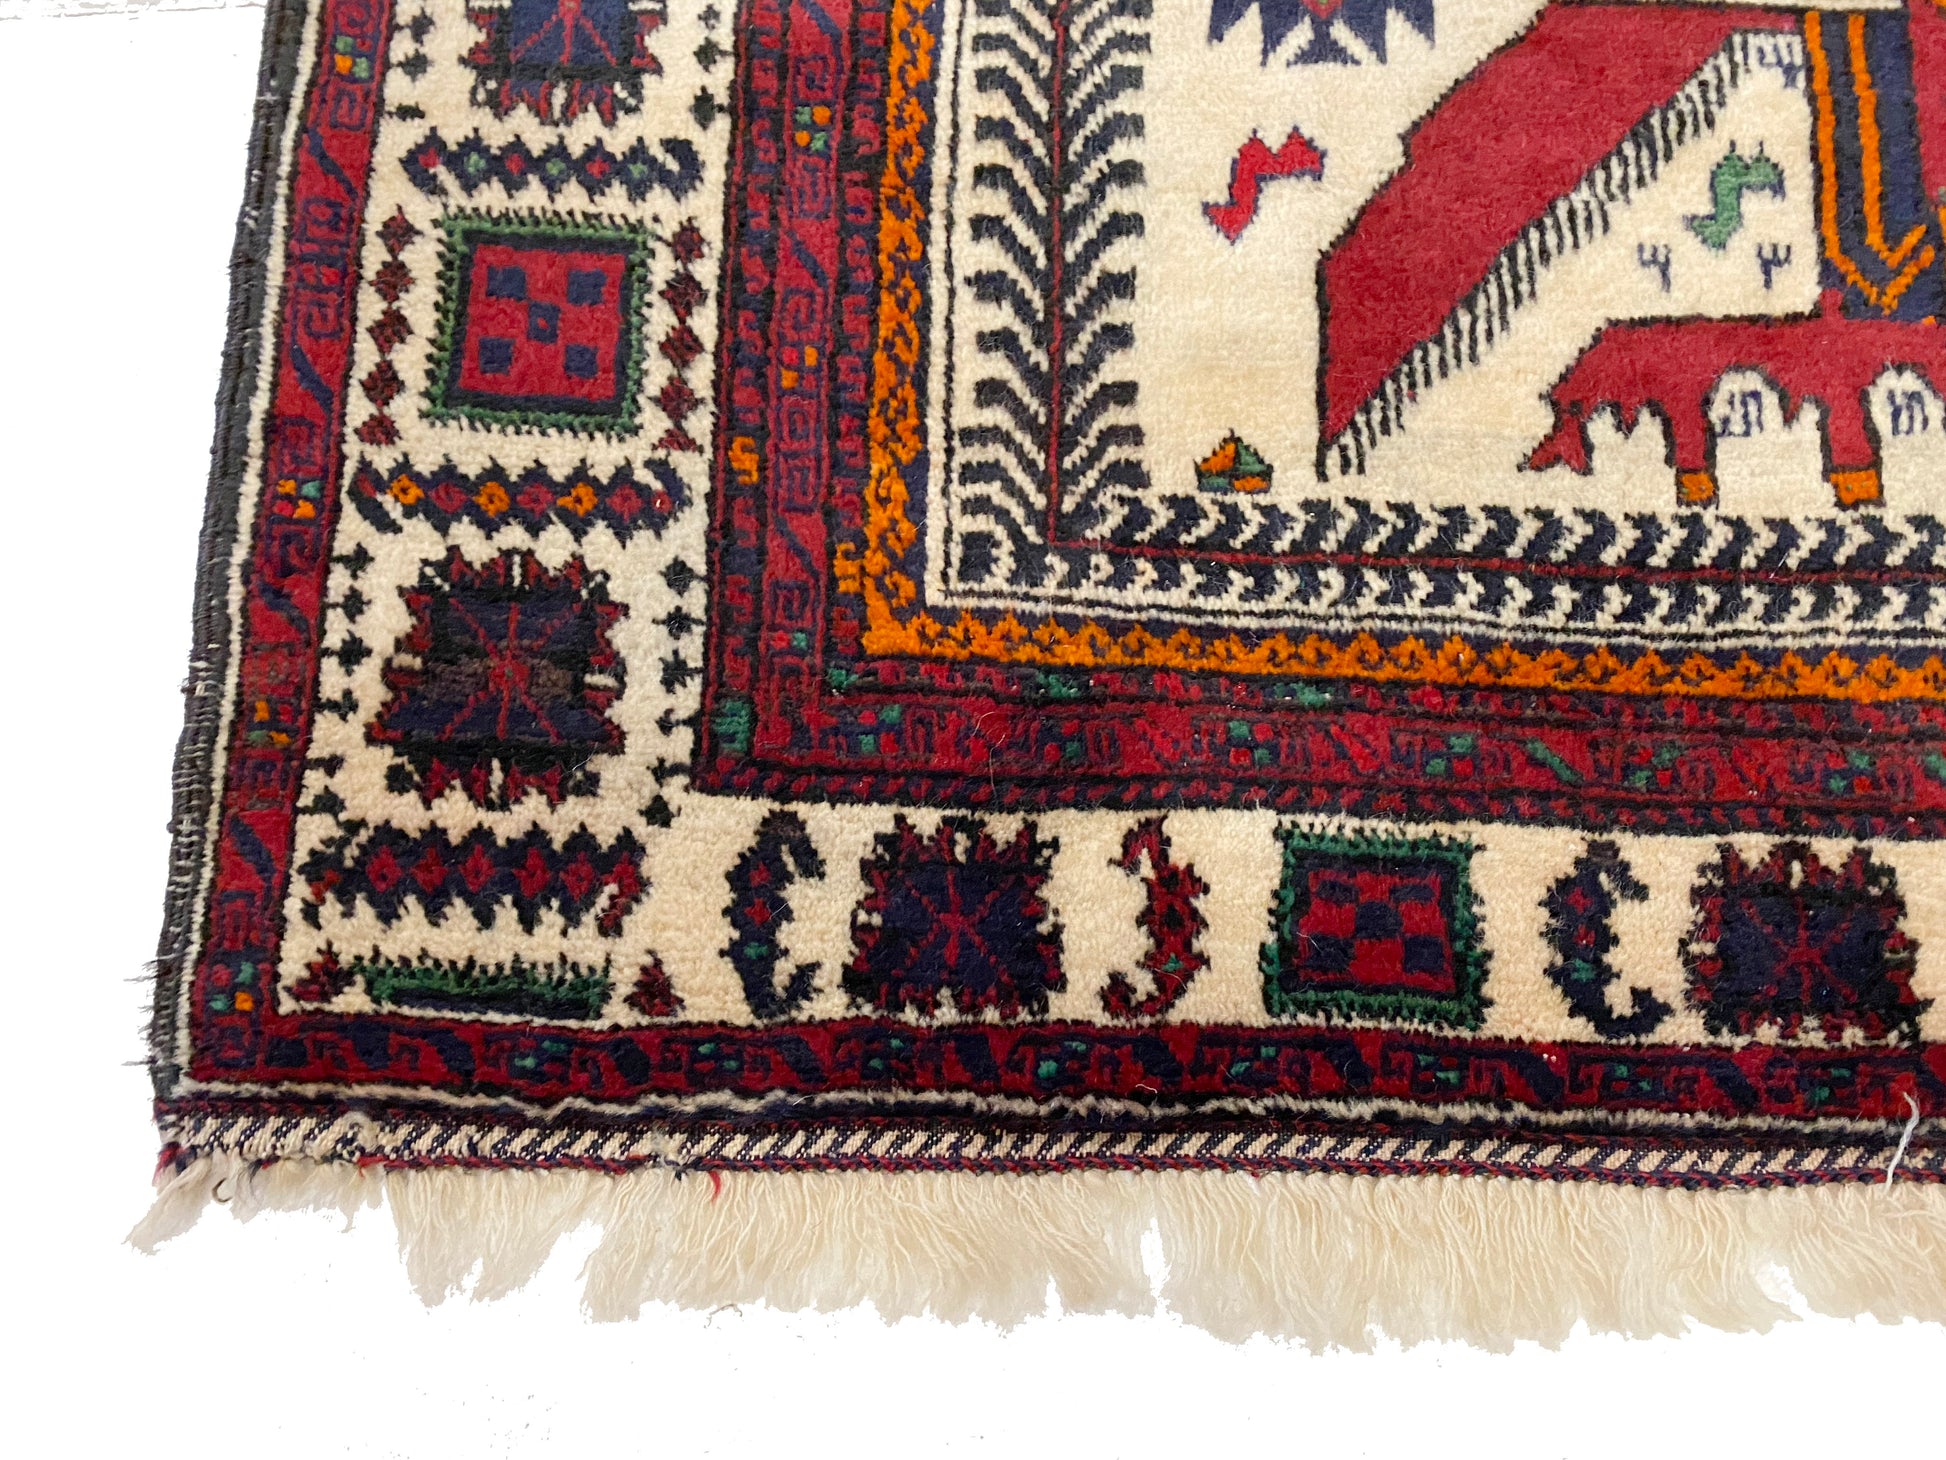 Detail of lower corner of Afghan pictorial rug with cream base and three figures in blue cloaks across the middle, figures with crowns on horses at the top and bottom of rug woven in deep blue and reds